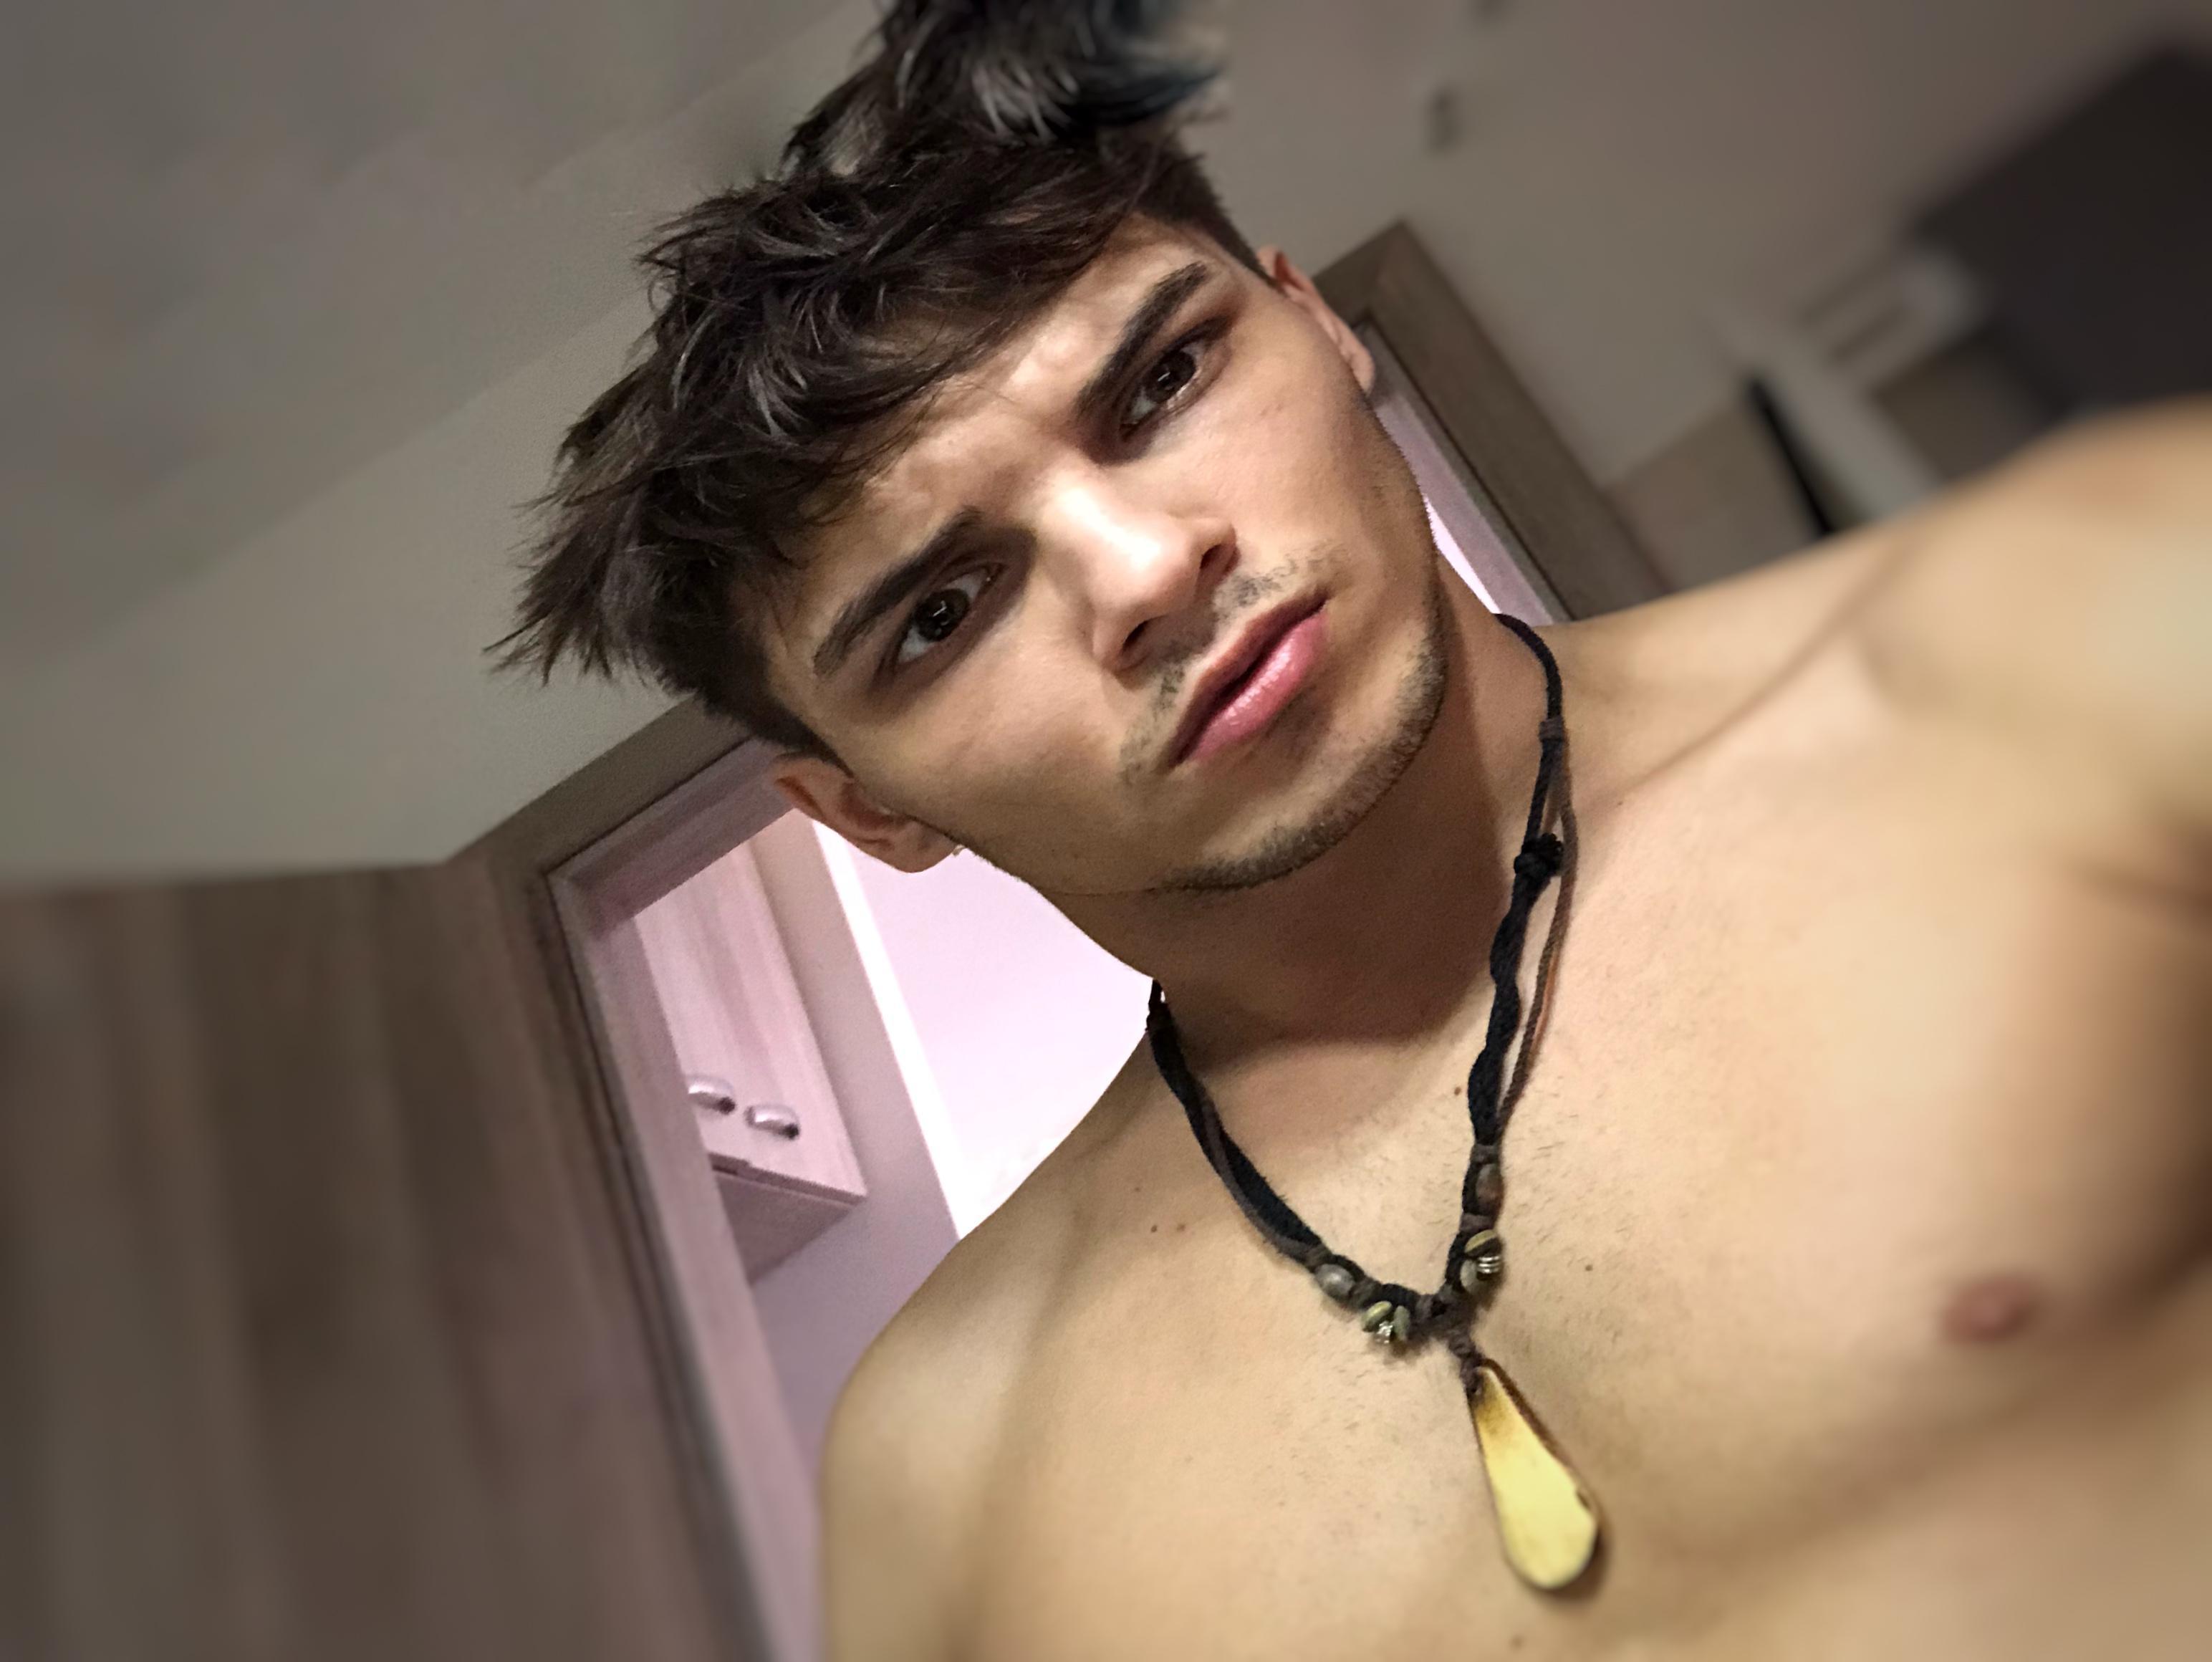 nude cam chat Angelfrank4